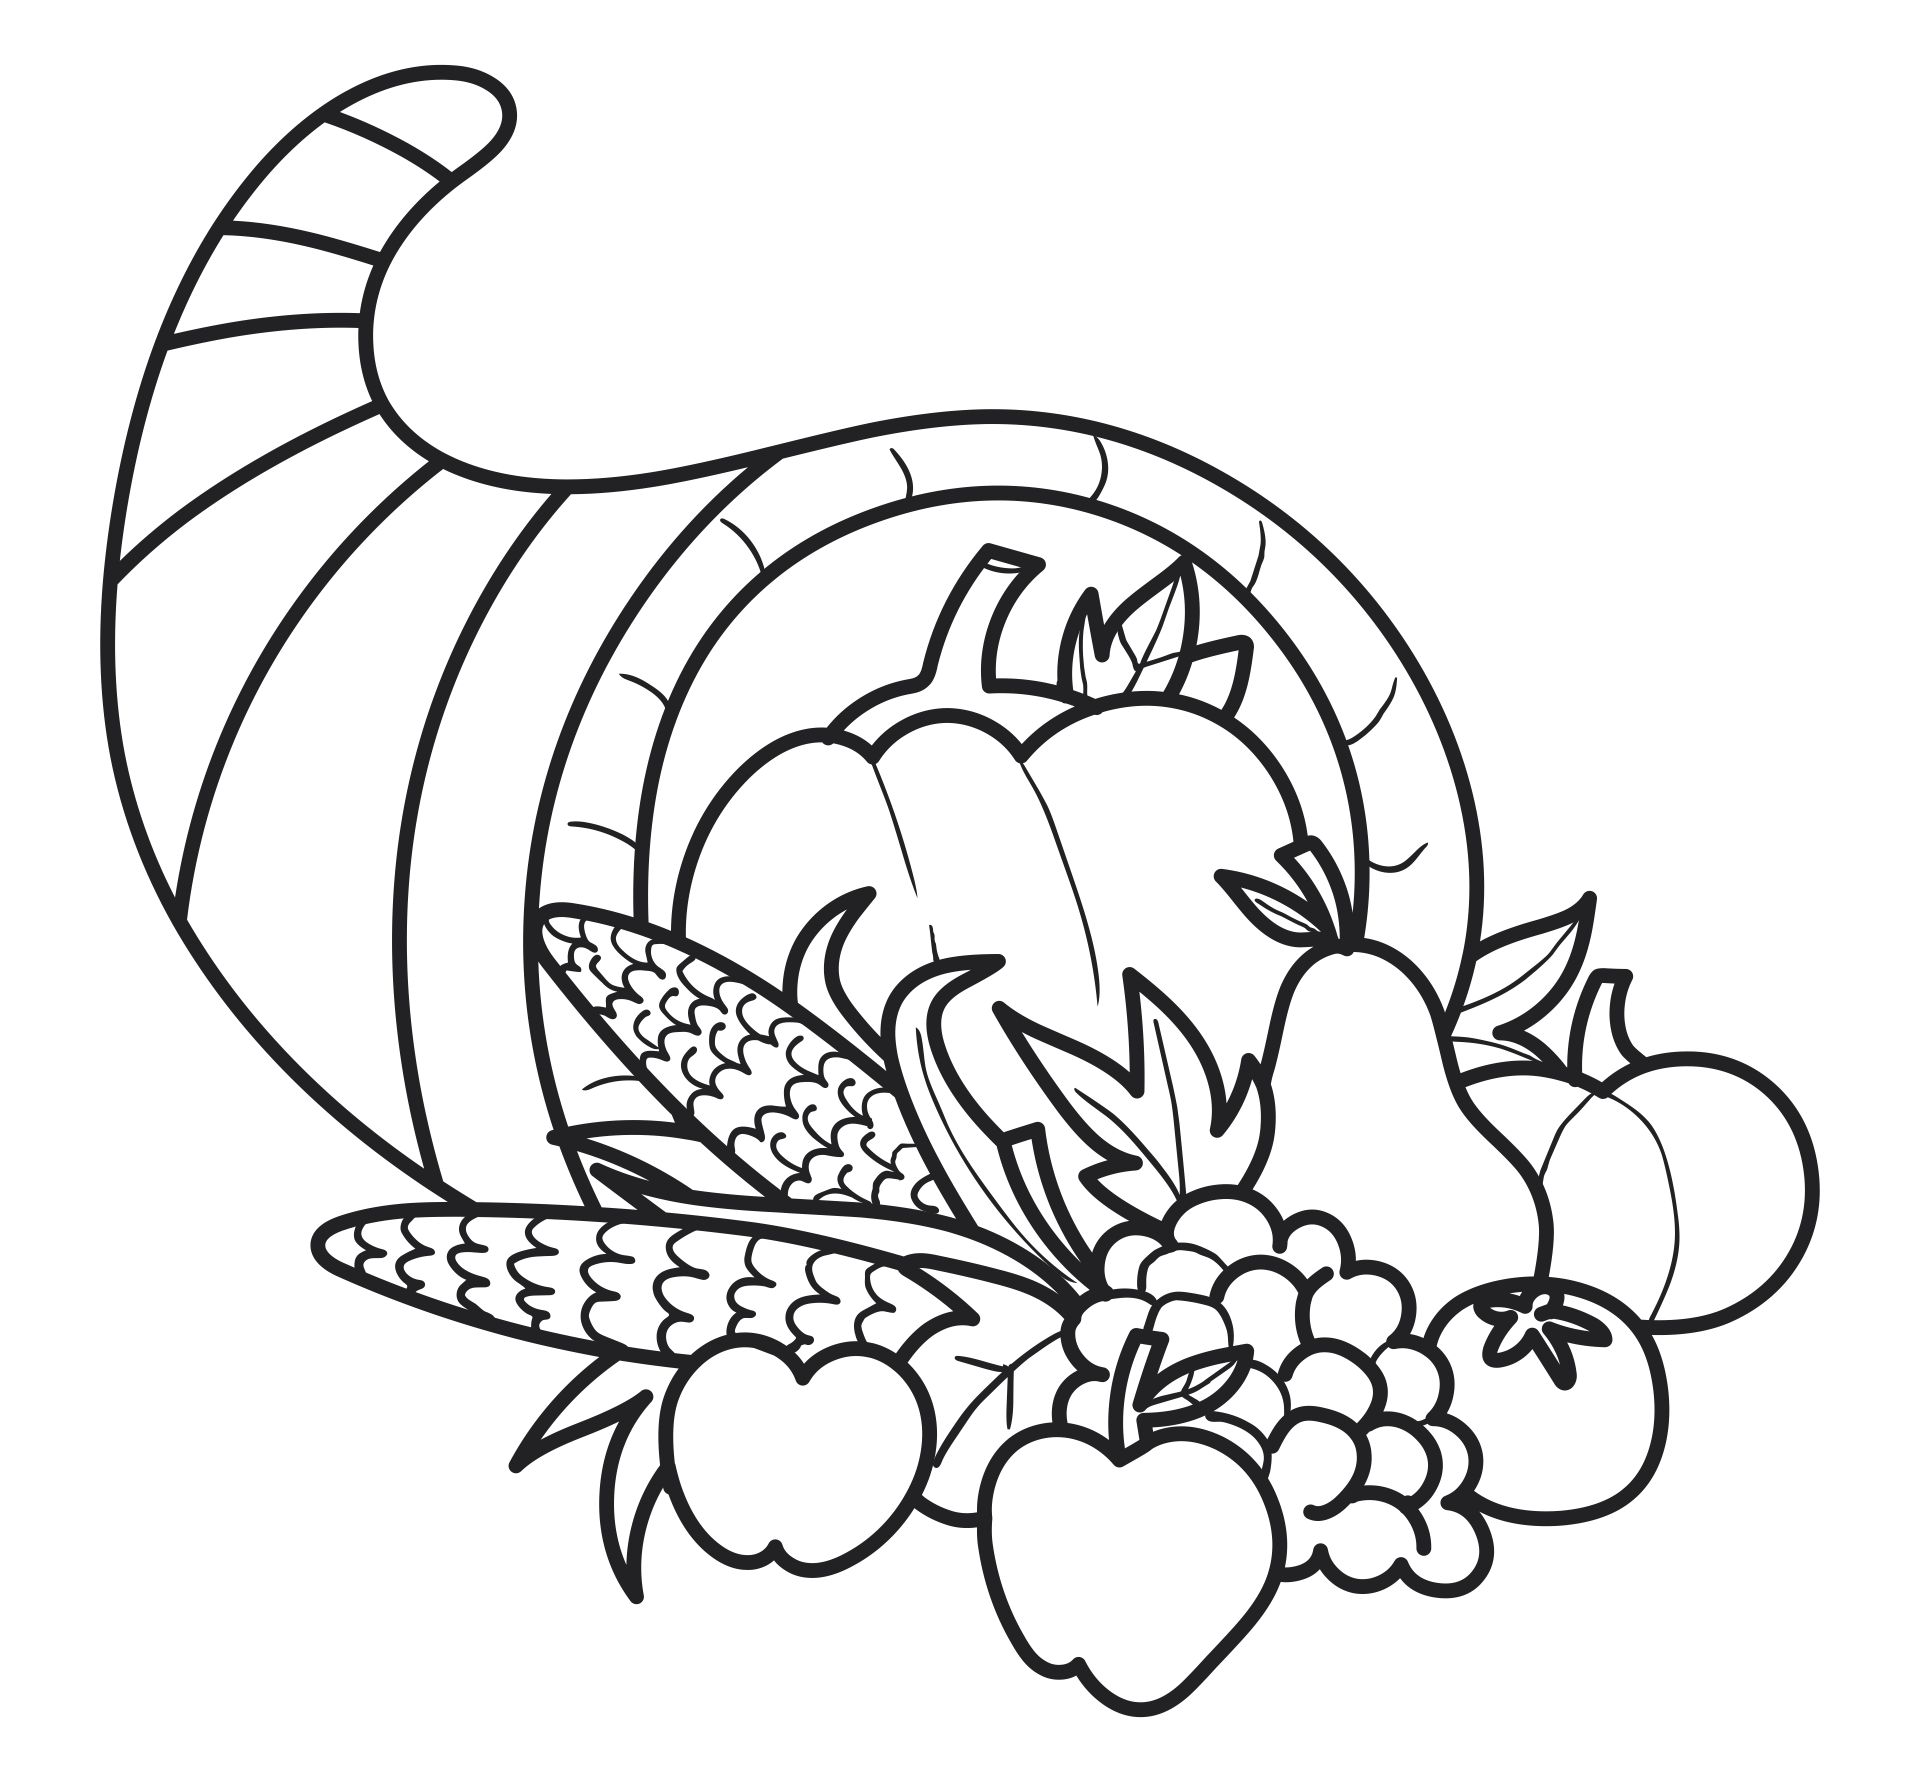 Preschool Thanksgiving Coloring Pages